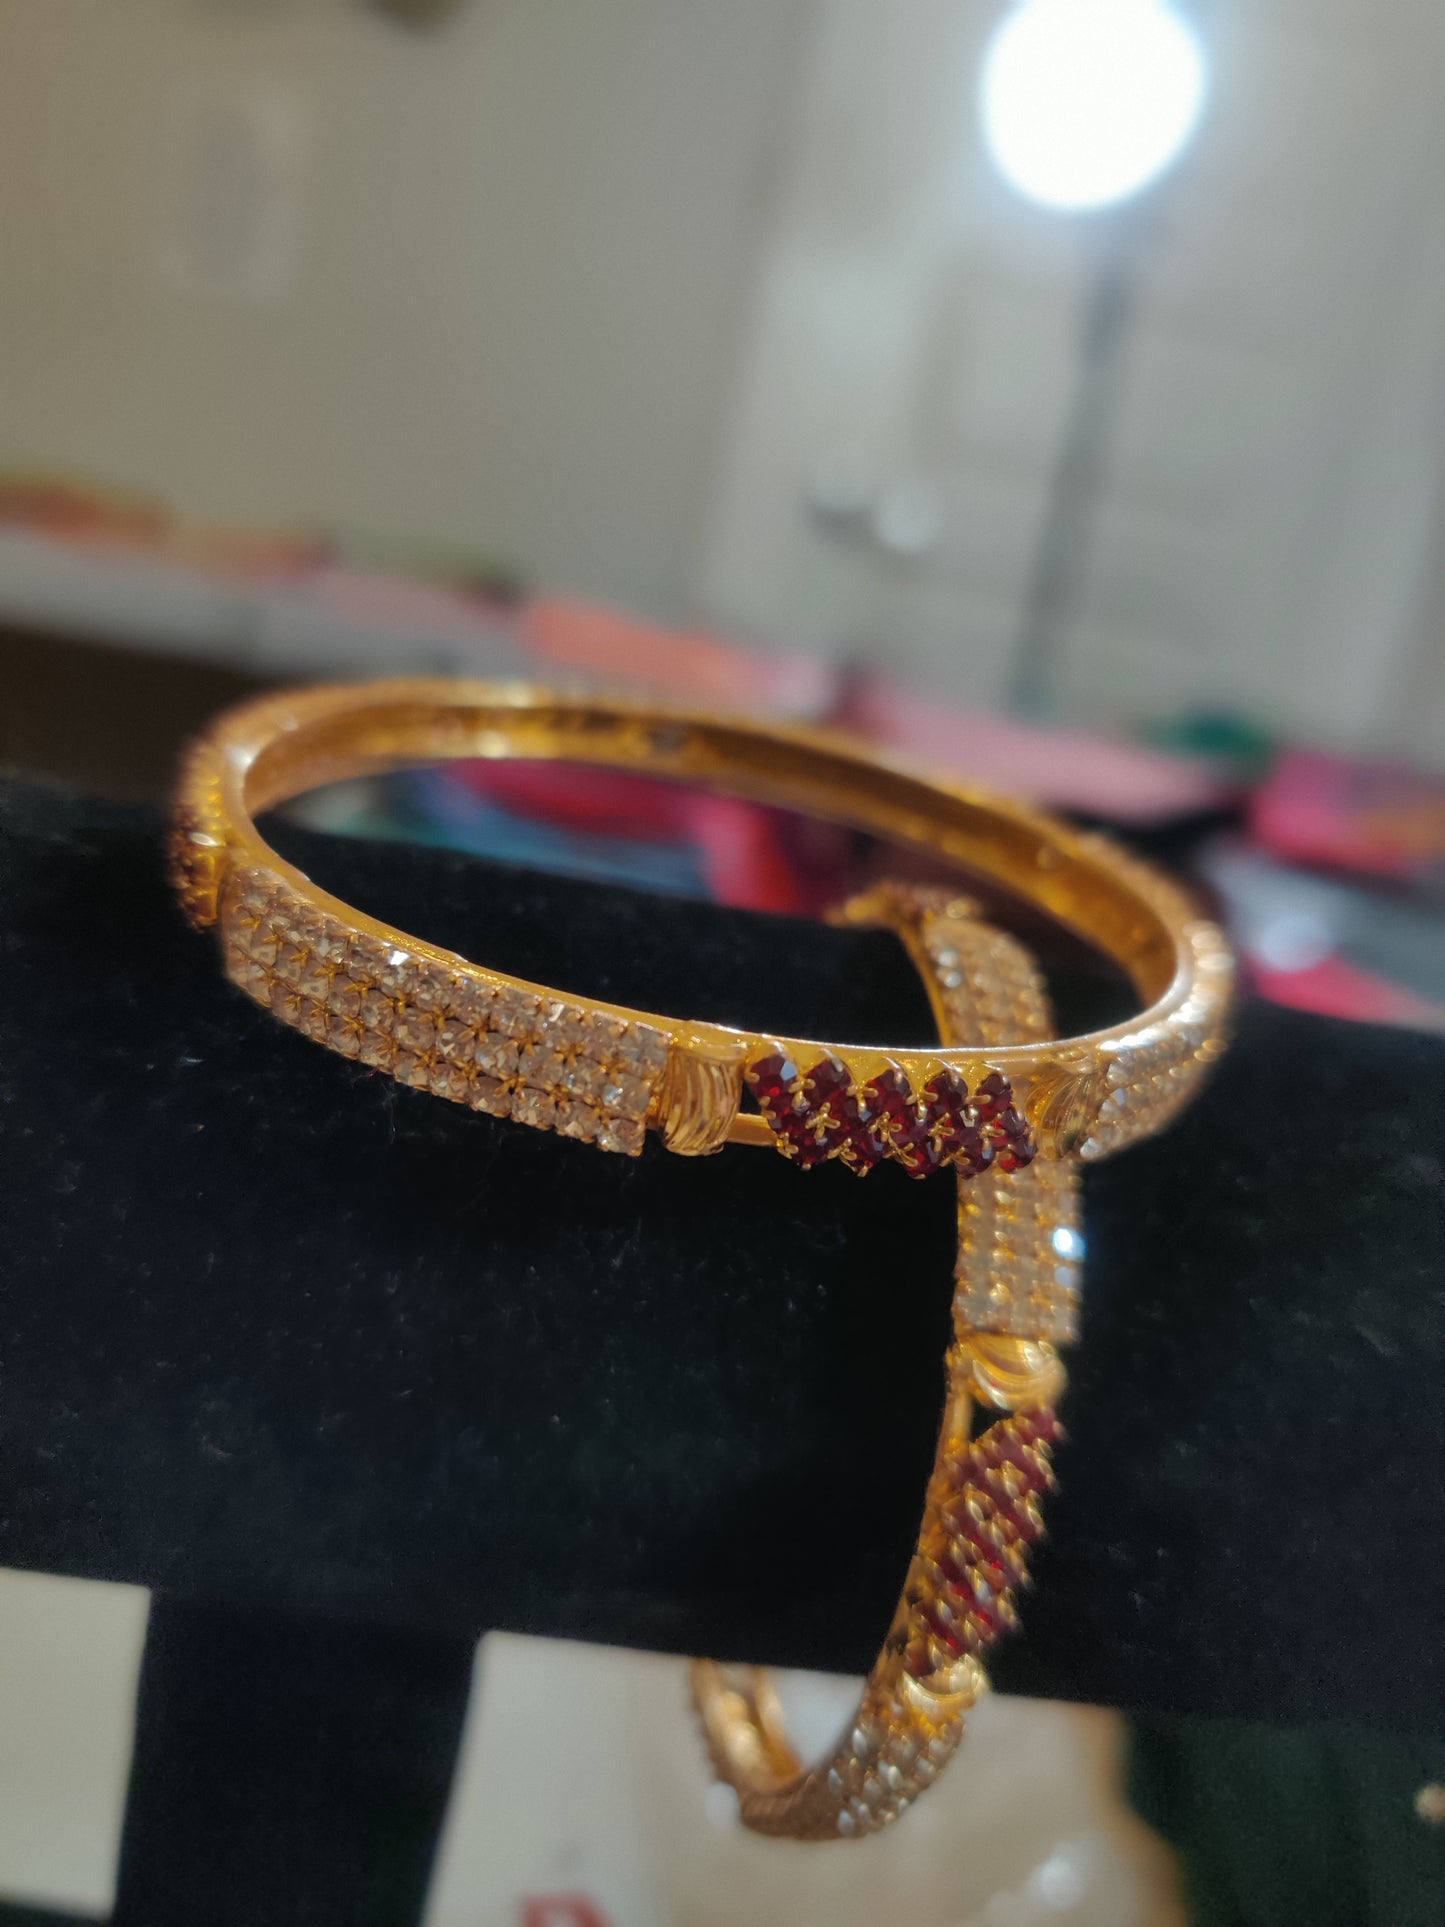 Pleasing Gold Plated Bangles With White And Red Stones In Mesa